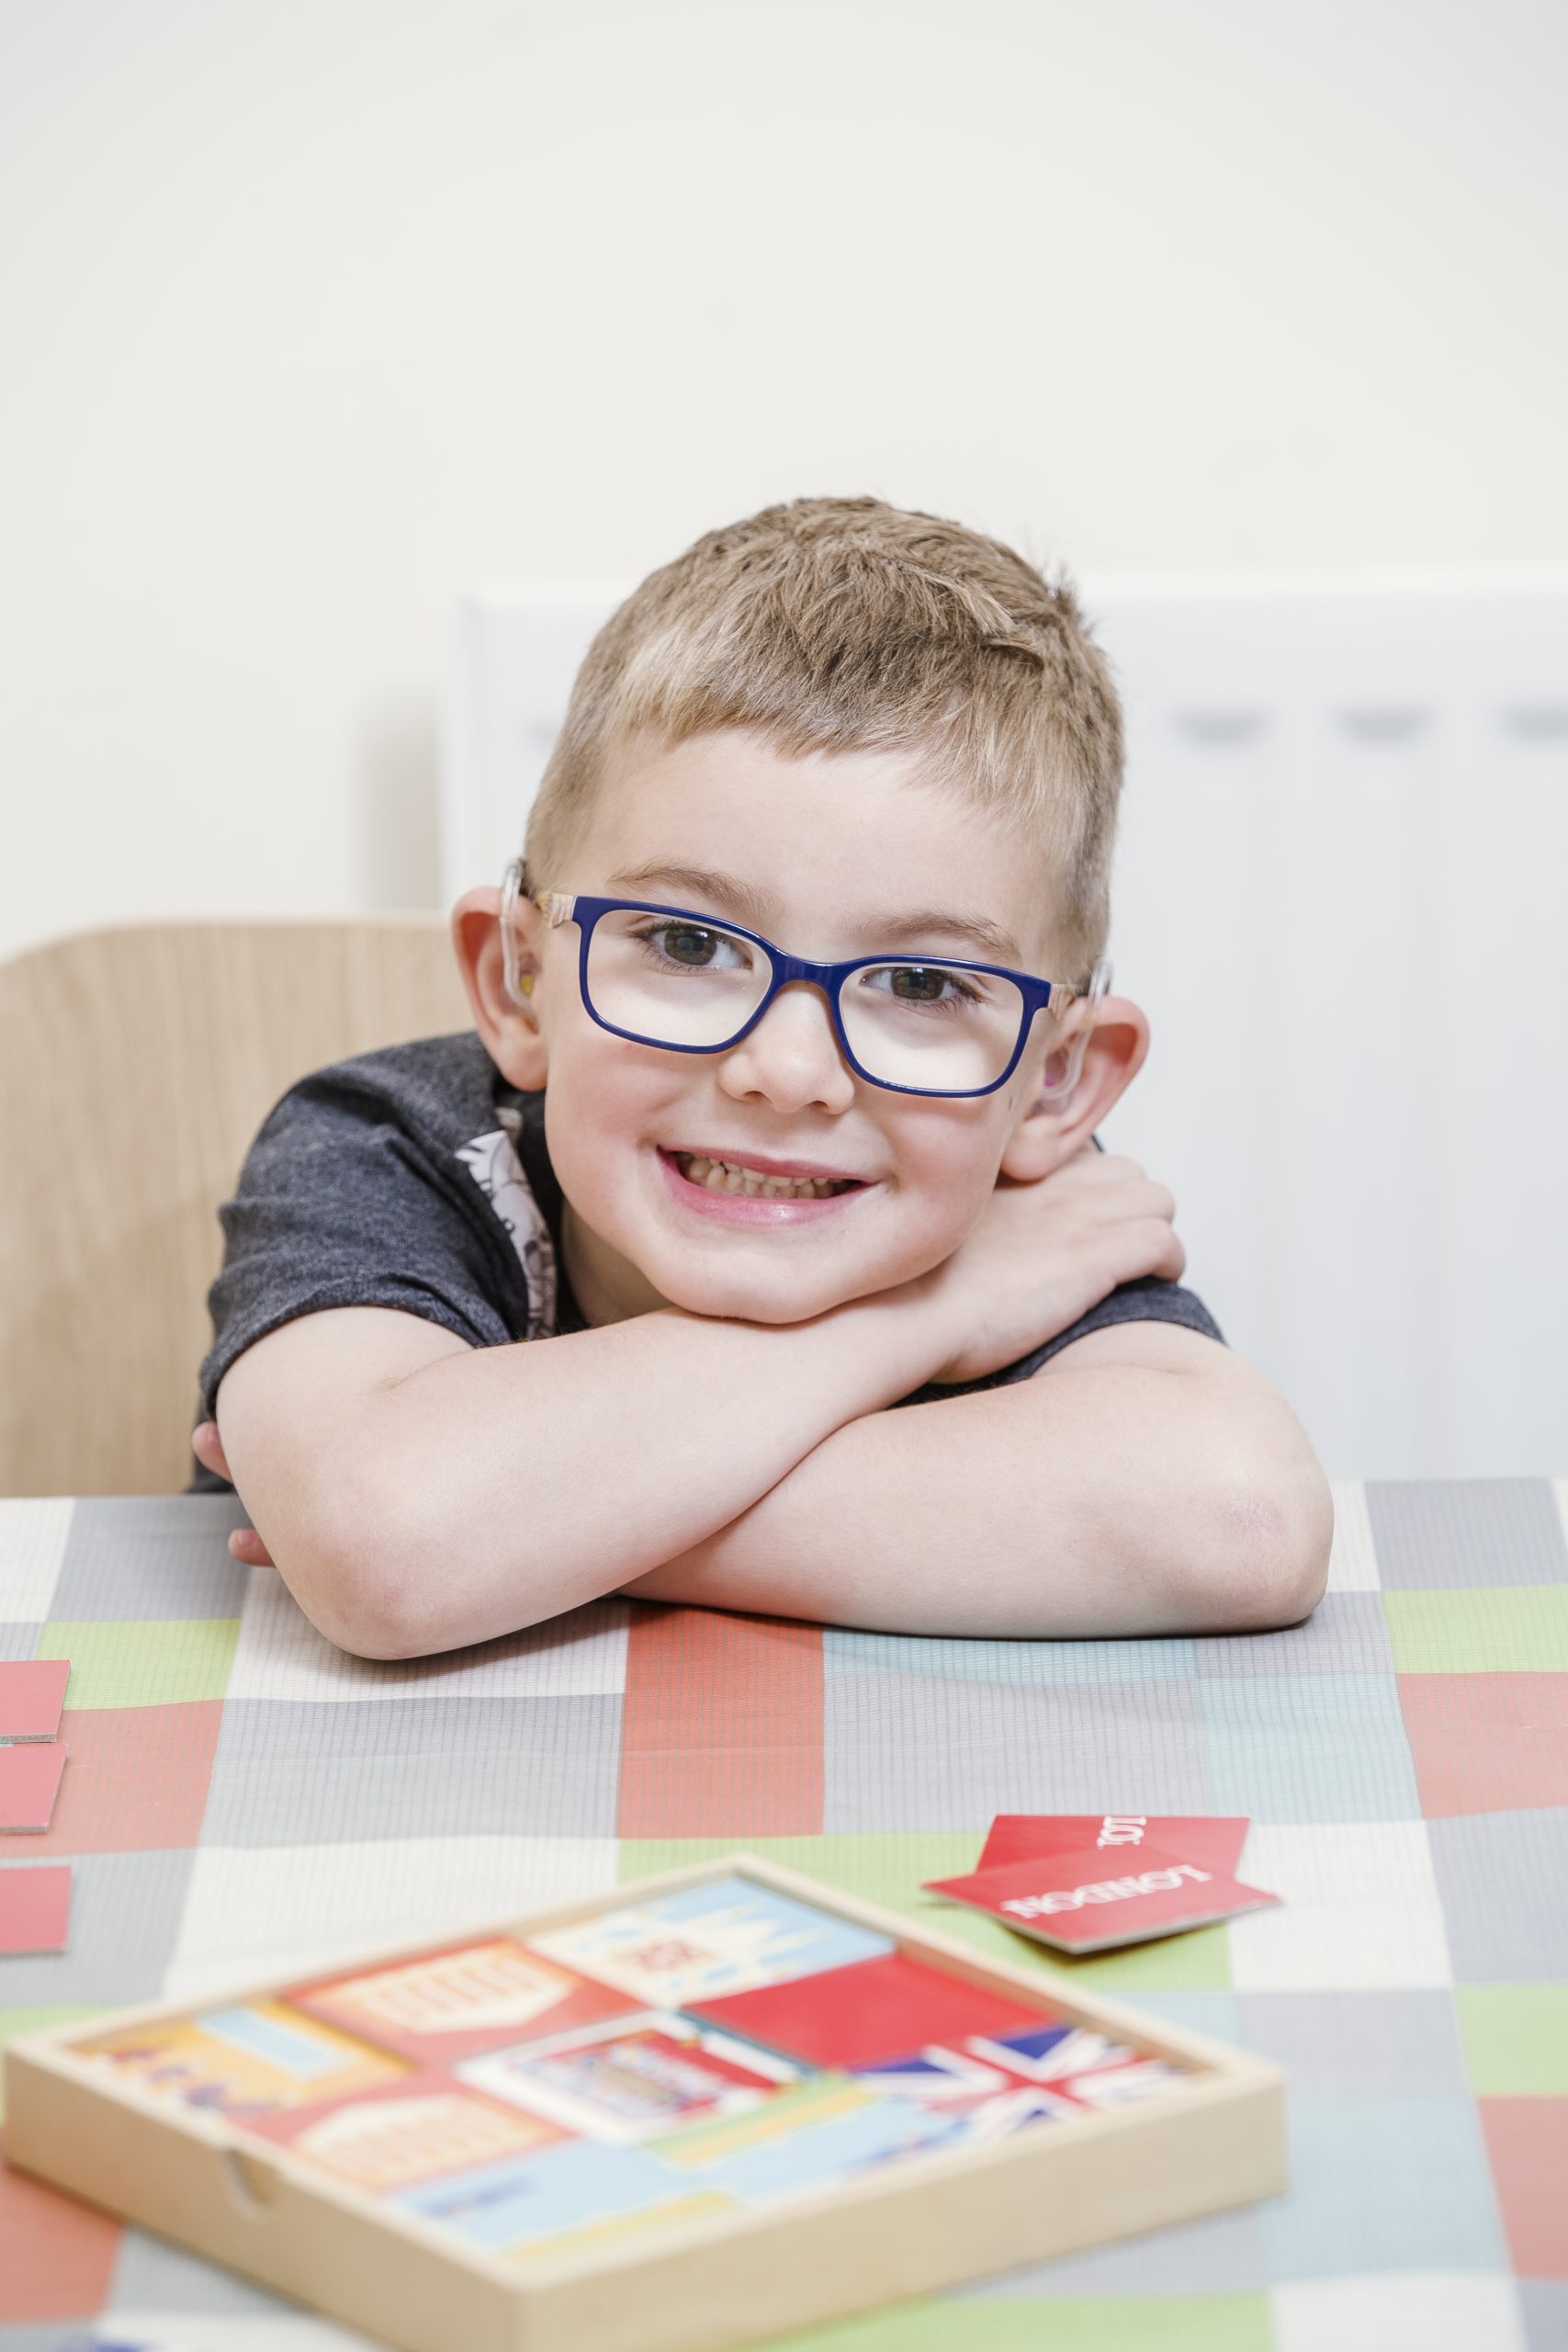 A young boy wearing glasses with his arms folded on a table